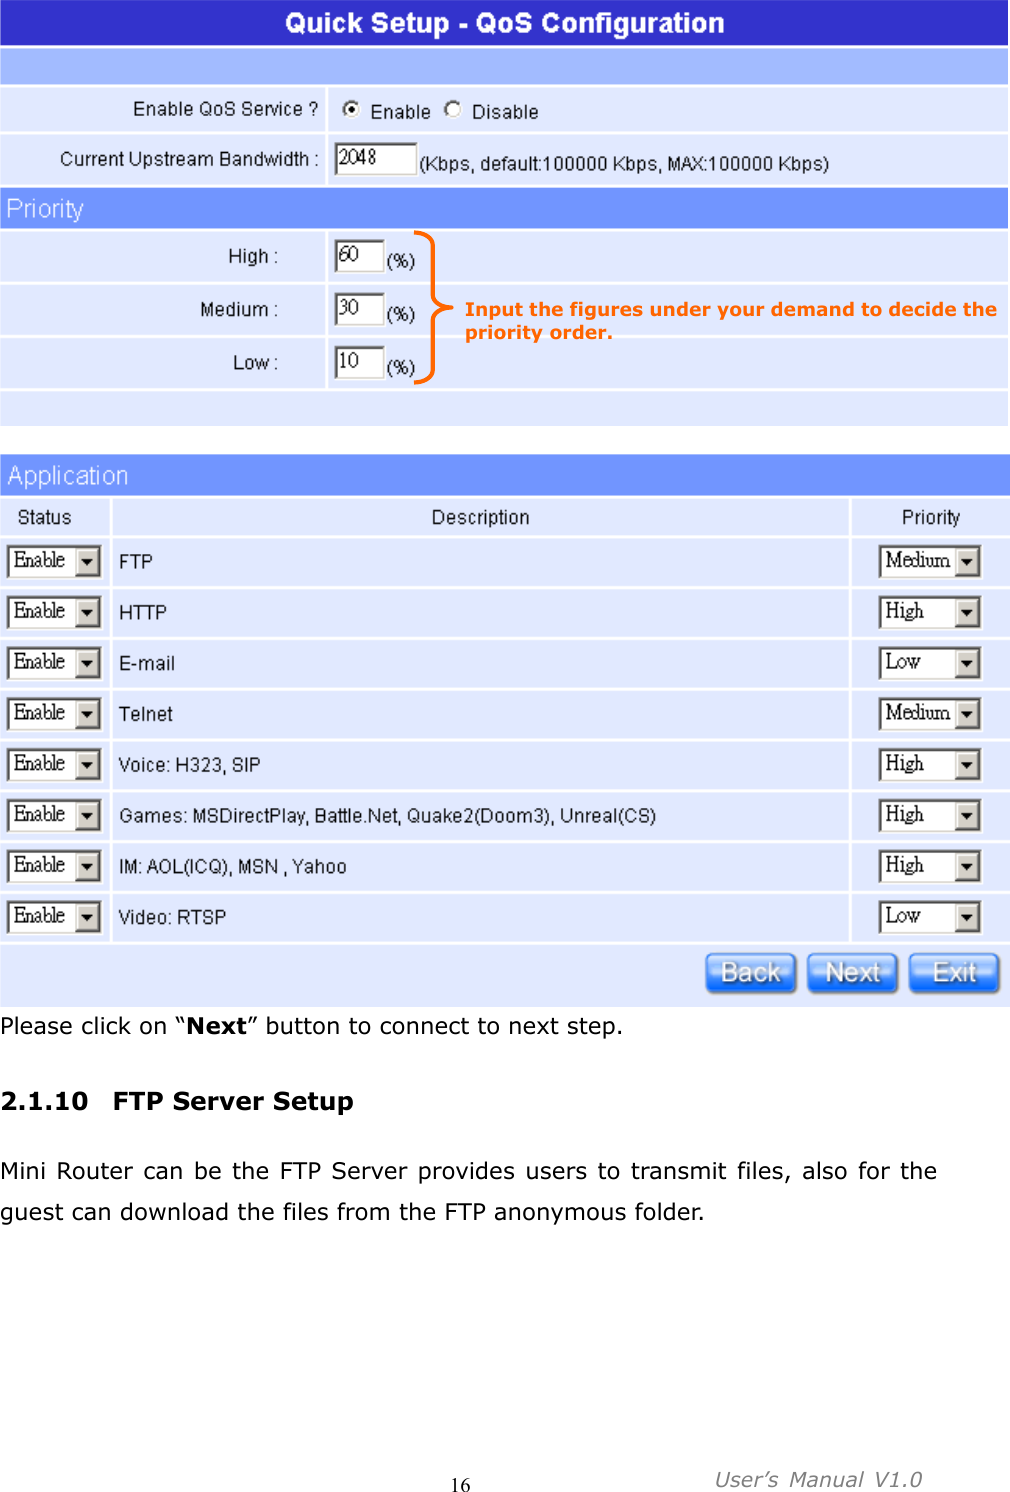                                     16           User’s  Manual  V1.0    Please click on “Next” button to connect to next step.  2.1.10 FTP Server Setup  Mini Router can be the FTP Server provides users to transmit files, also for the guest can download the files from the FTP anonymous folder. Input the figures under your demand to decide the priority order. 